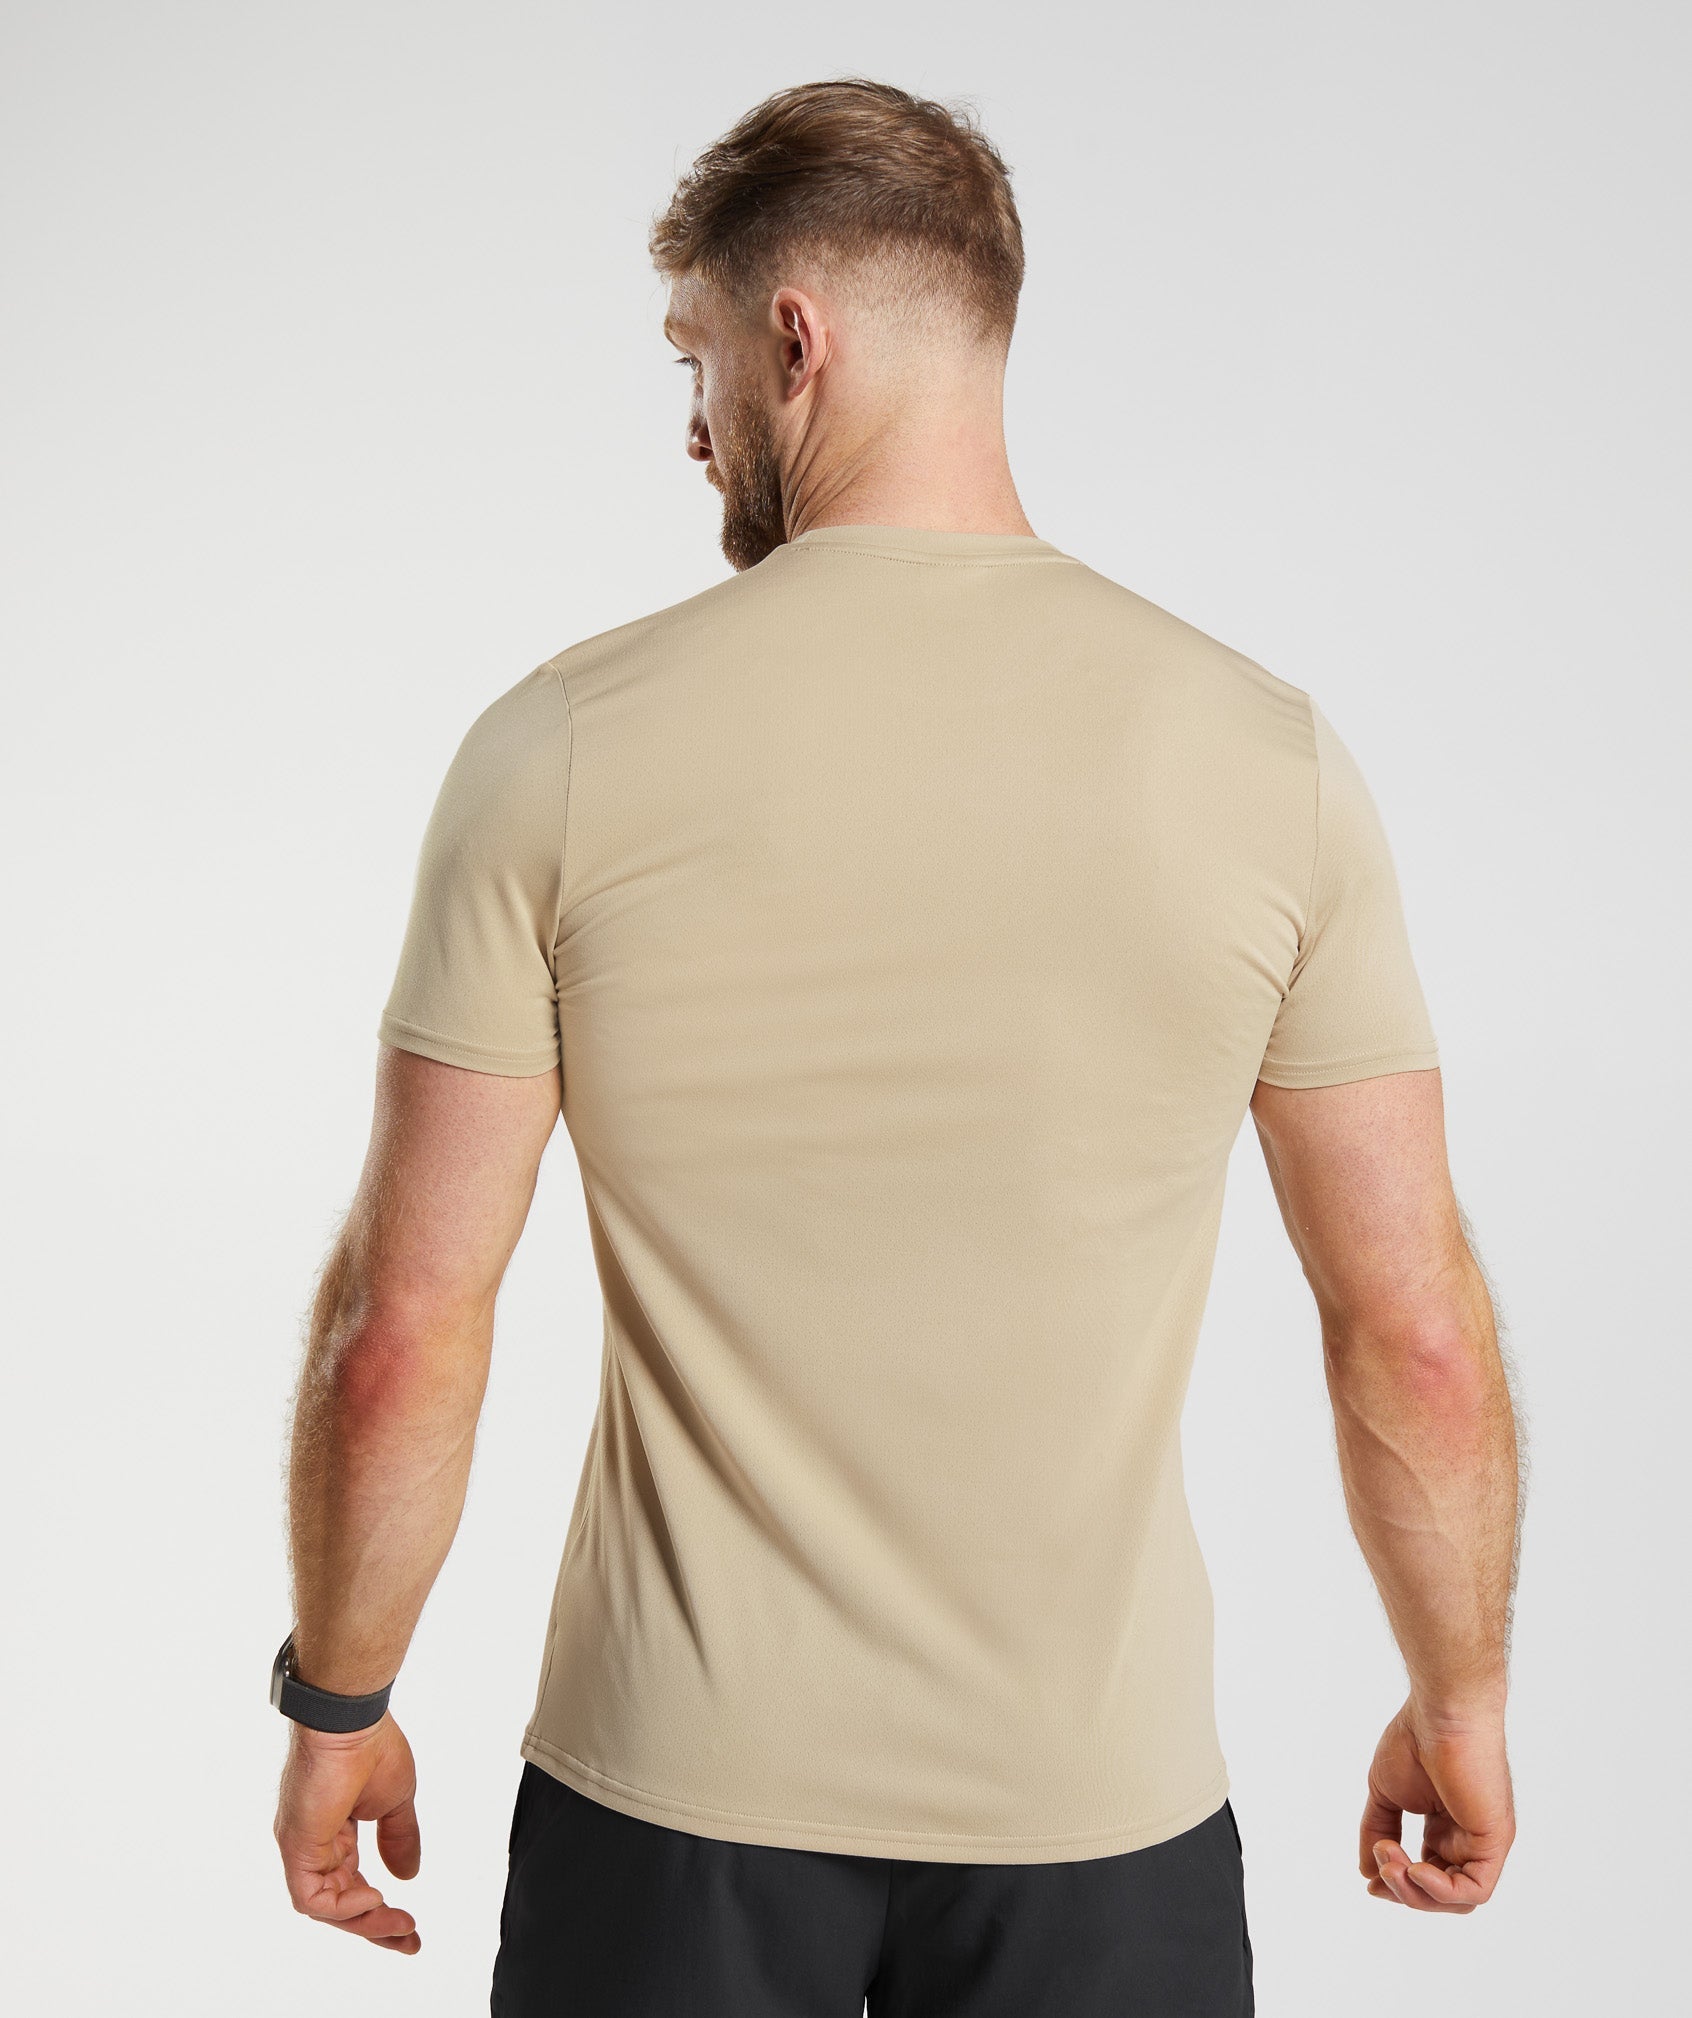 Arrival T-Shirt in Toasted Brown